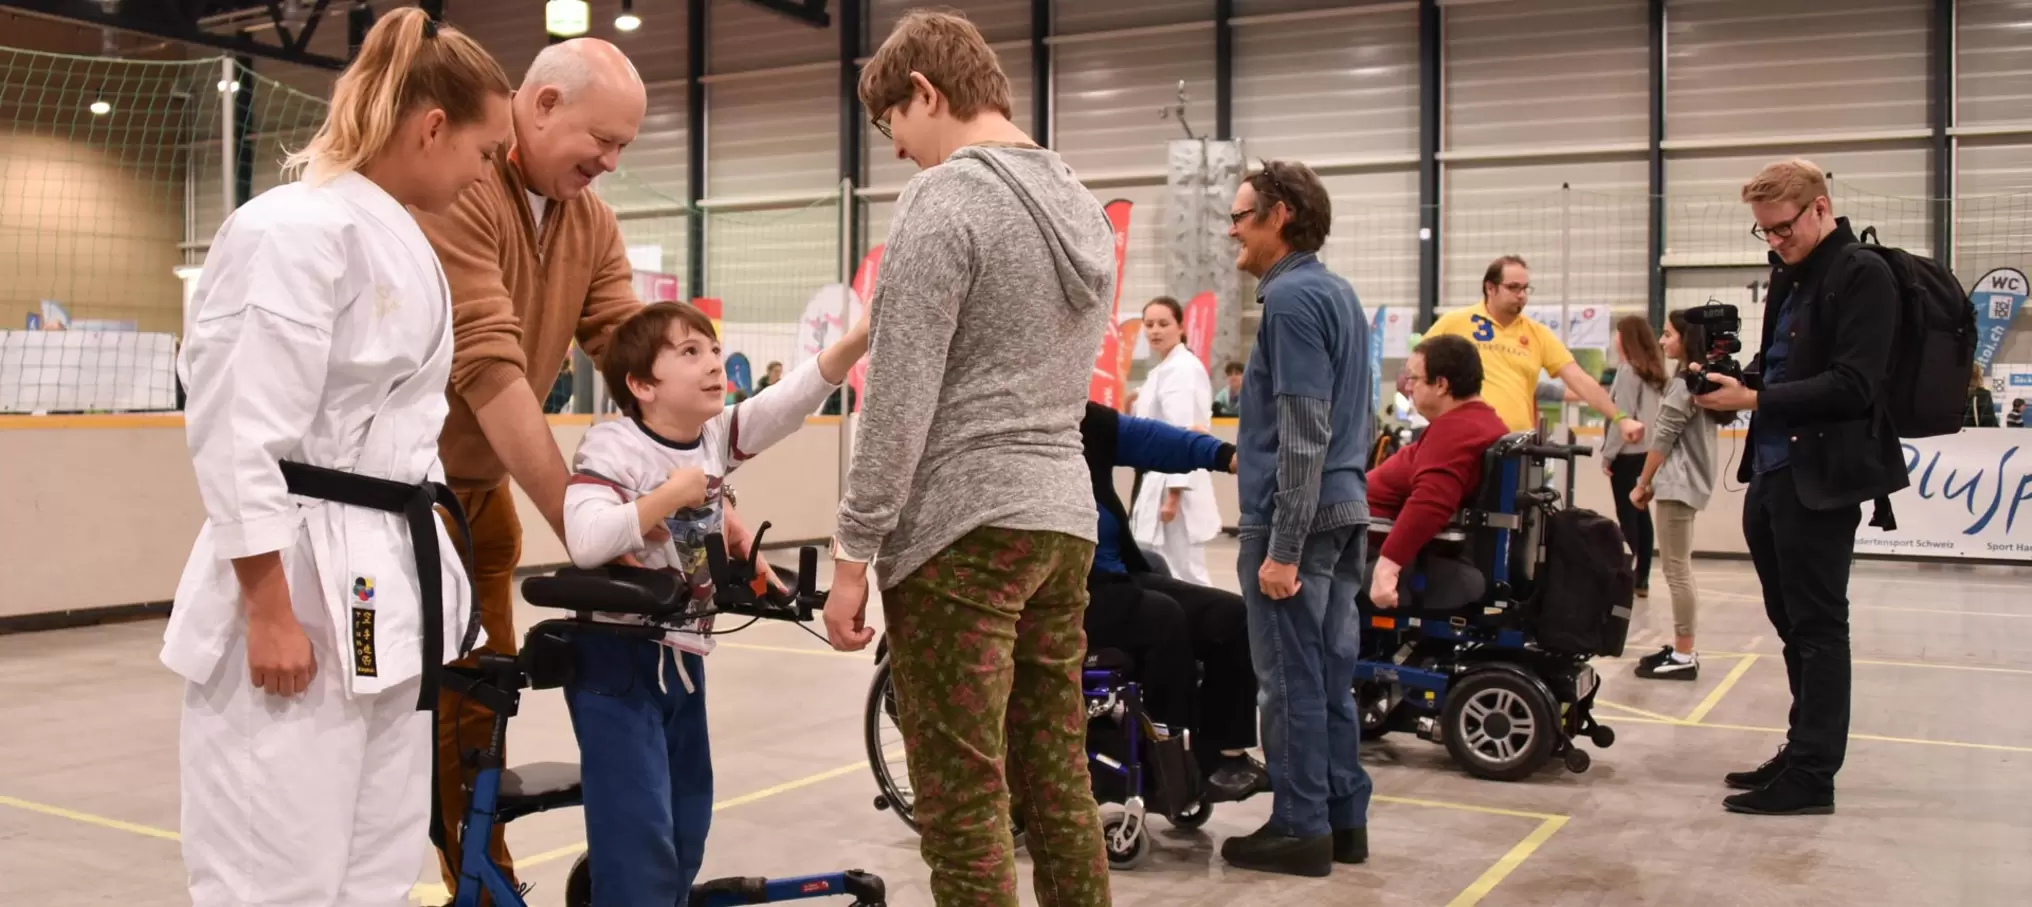 At events like the Swiss Handicap Fair, people with and without disabilities come together